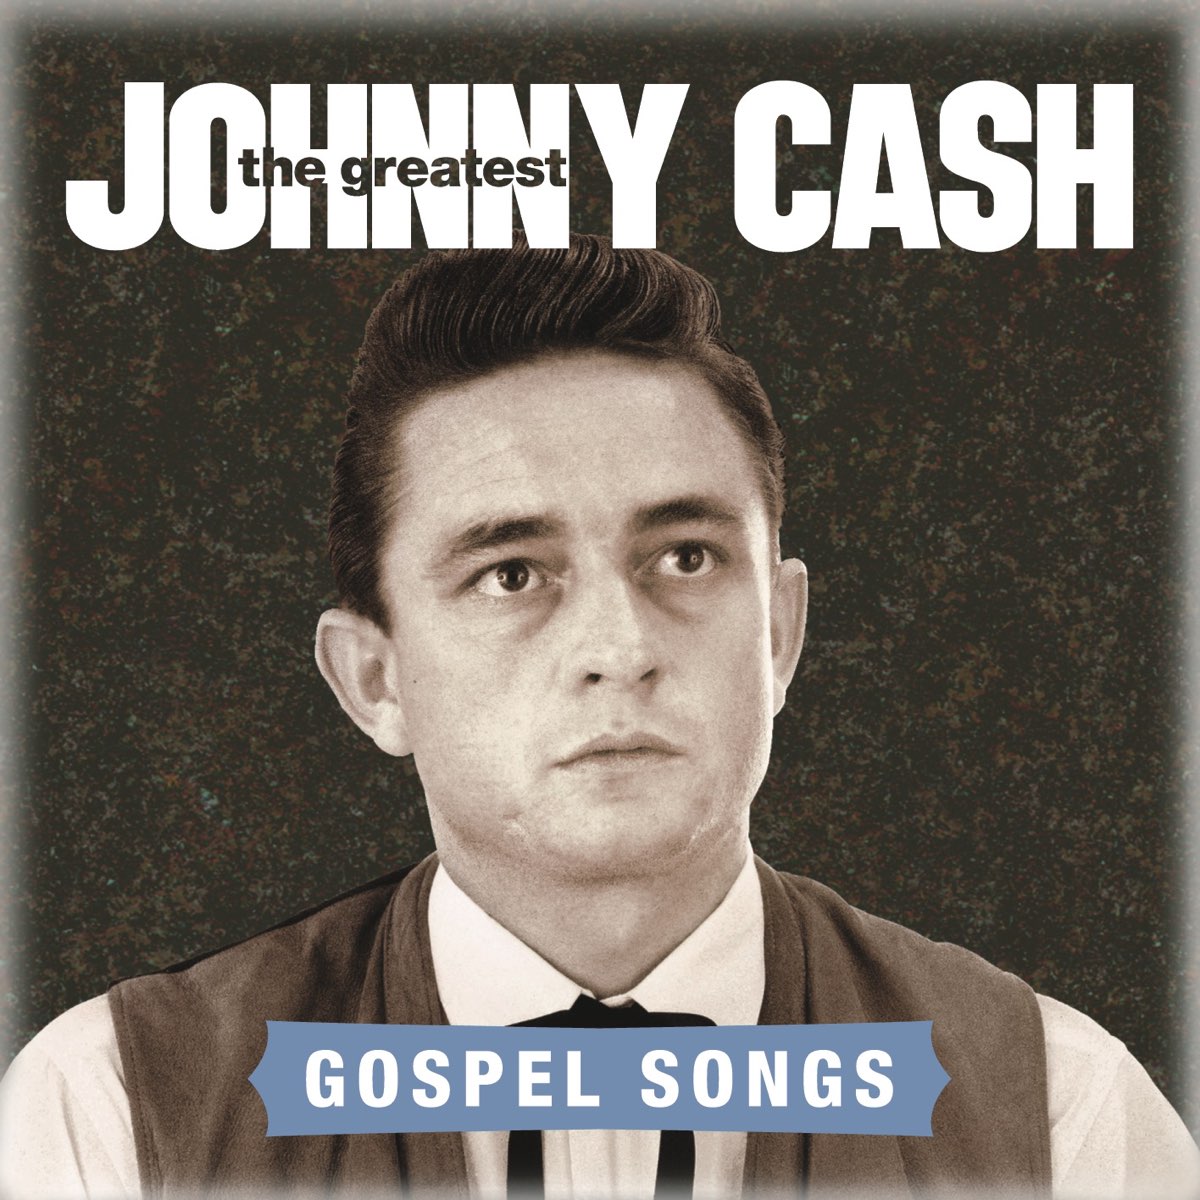 Песня hell s great dad на русском. Johnny Cash Now, there was a Song!.